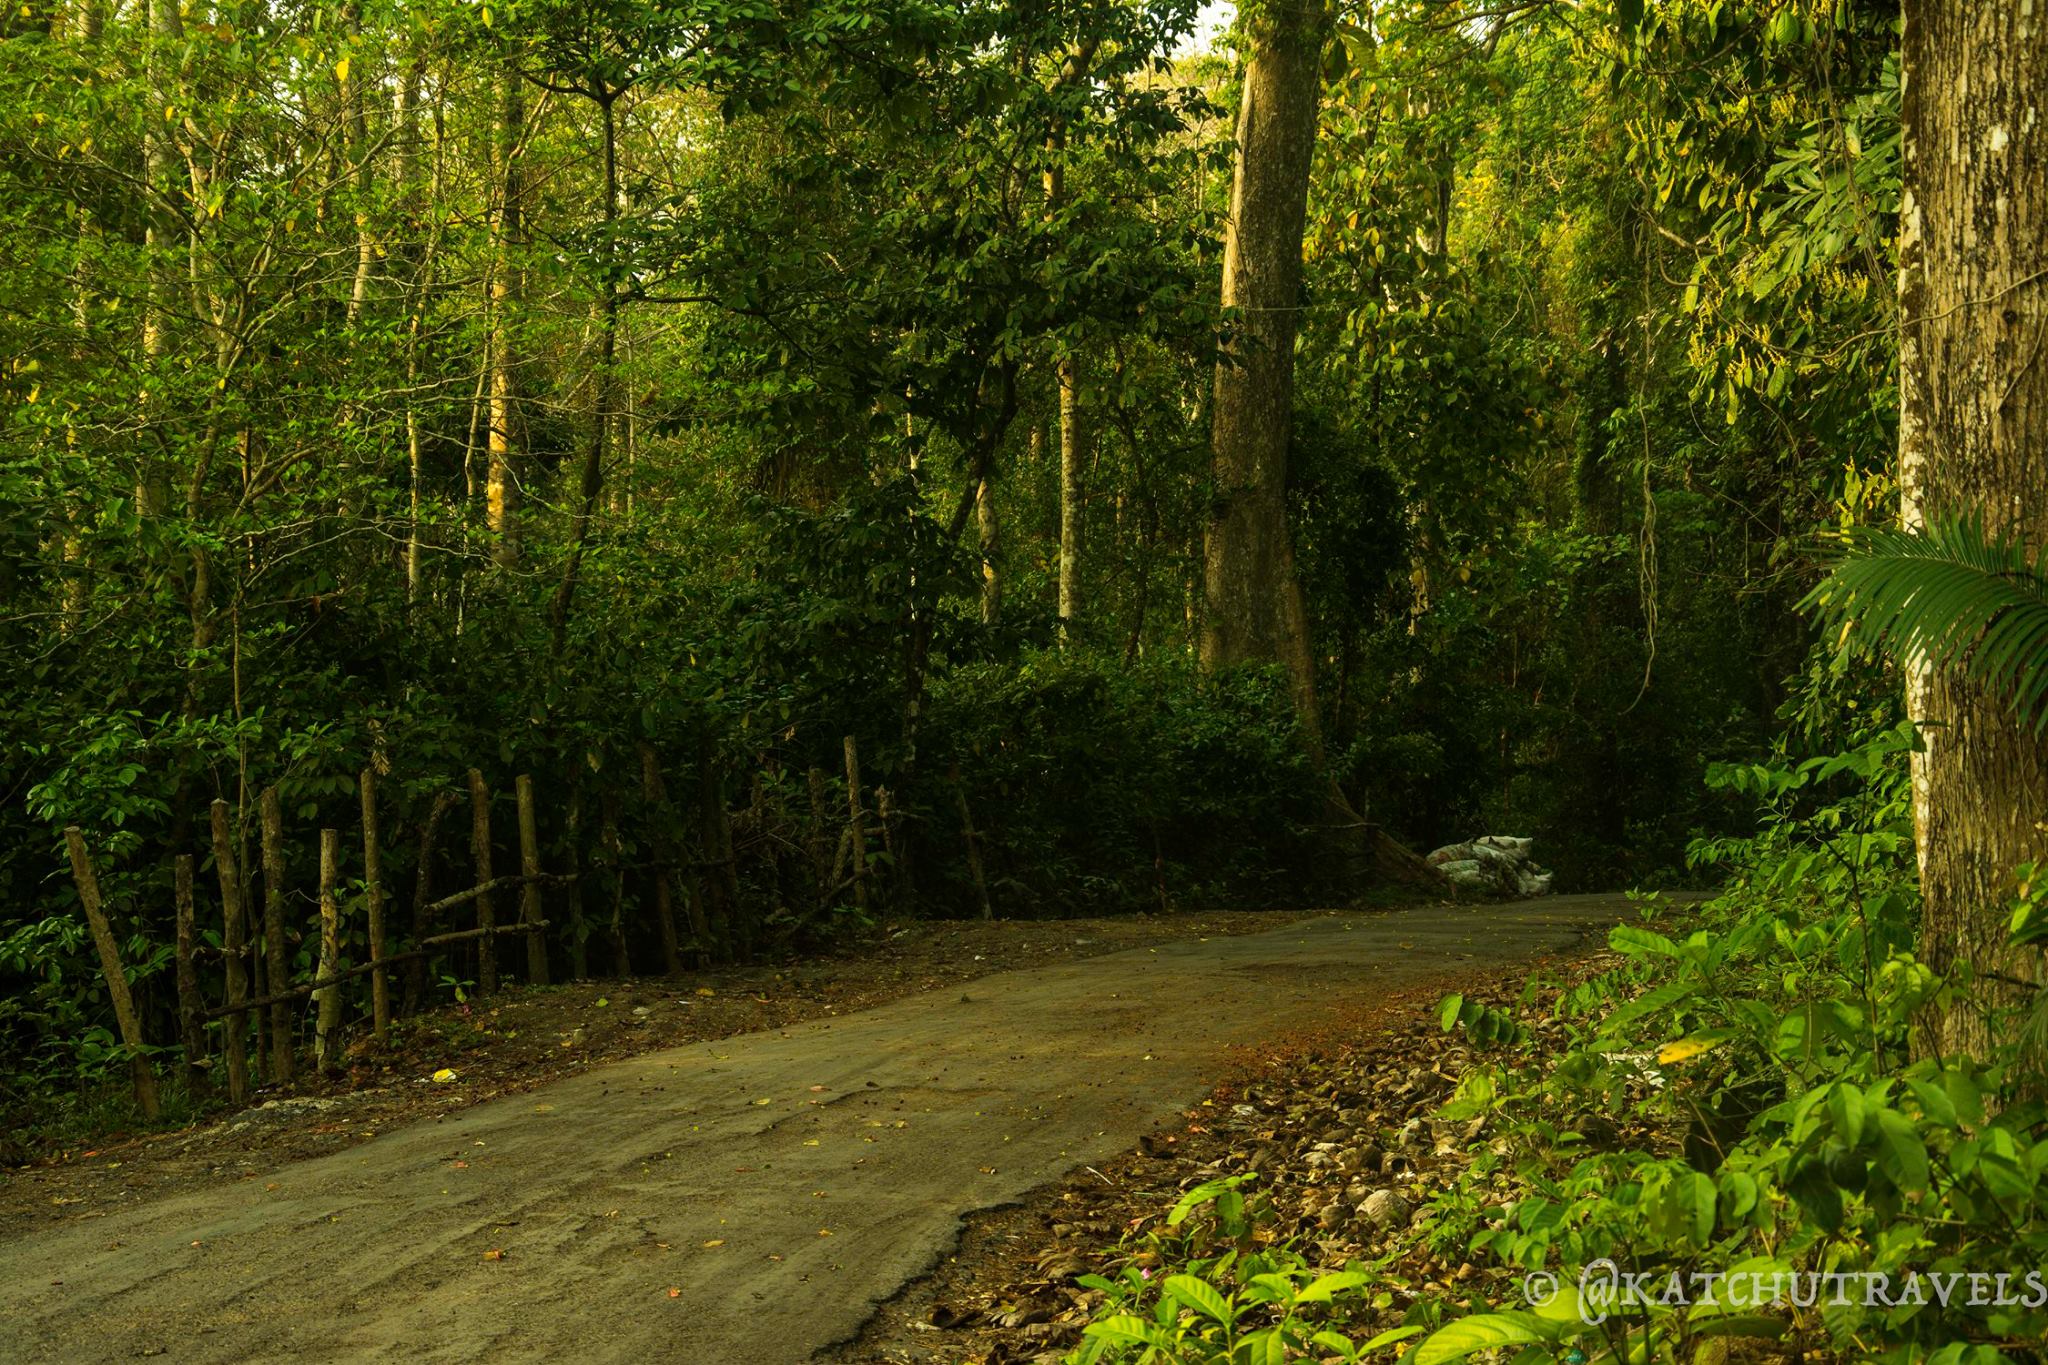 Driving through the Woods-Havelock Island